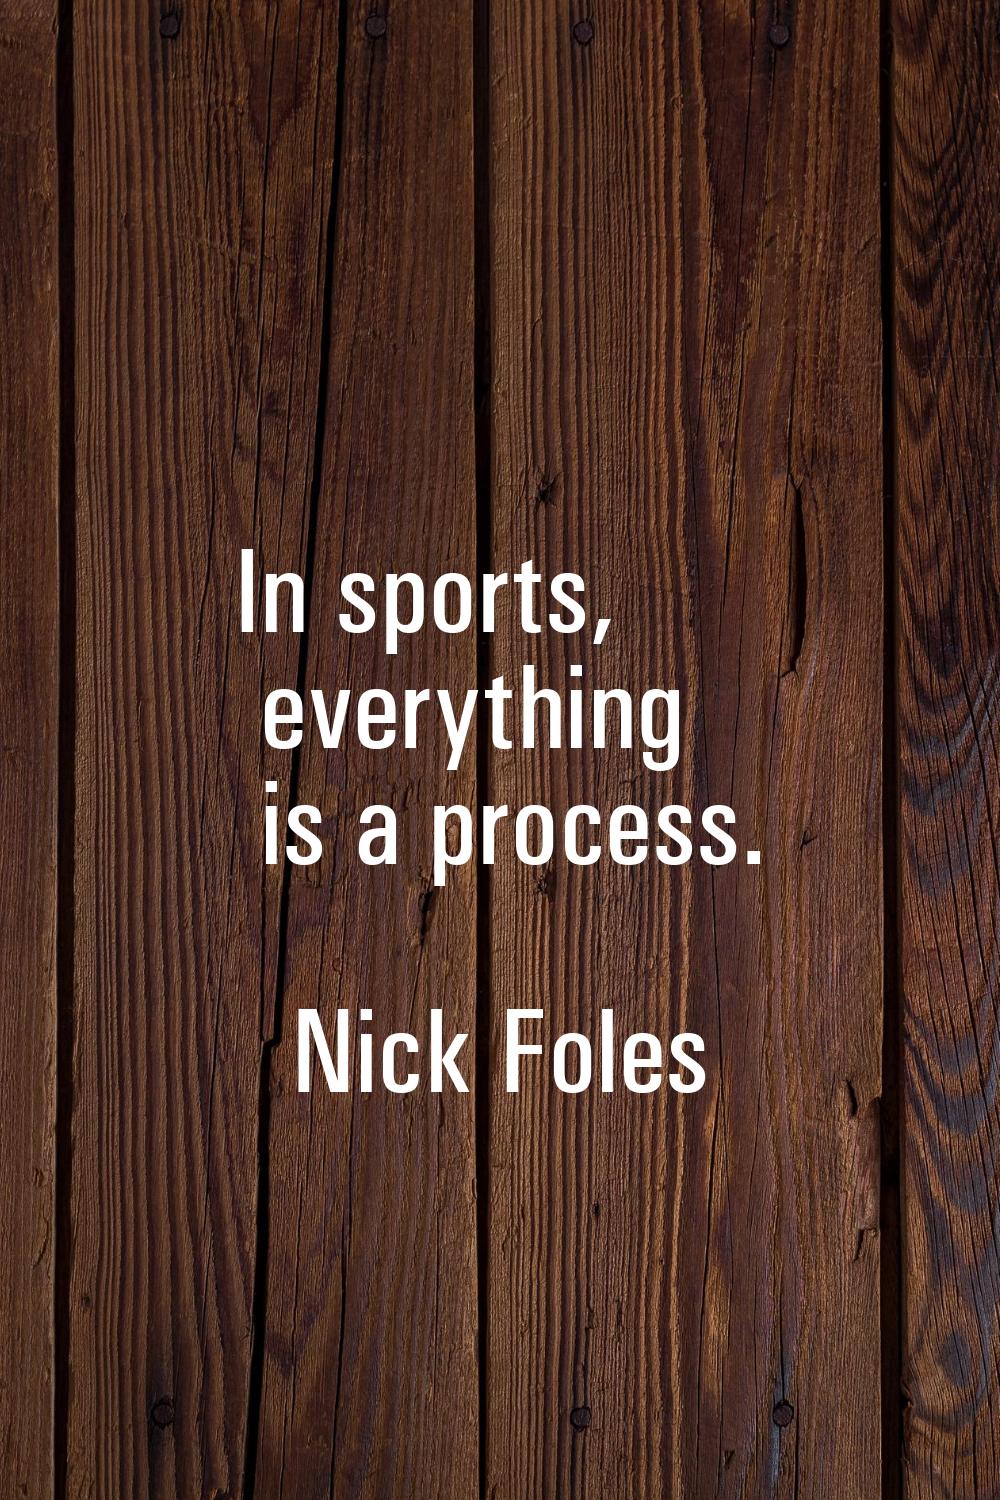 In sports, everything is a process.